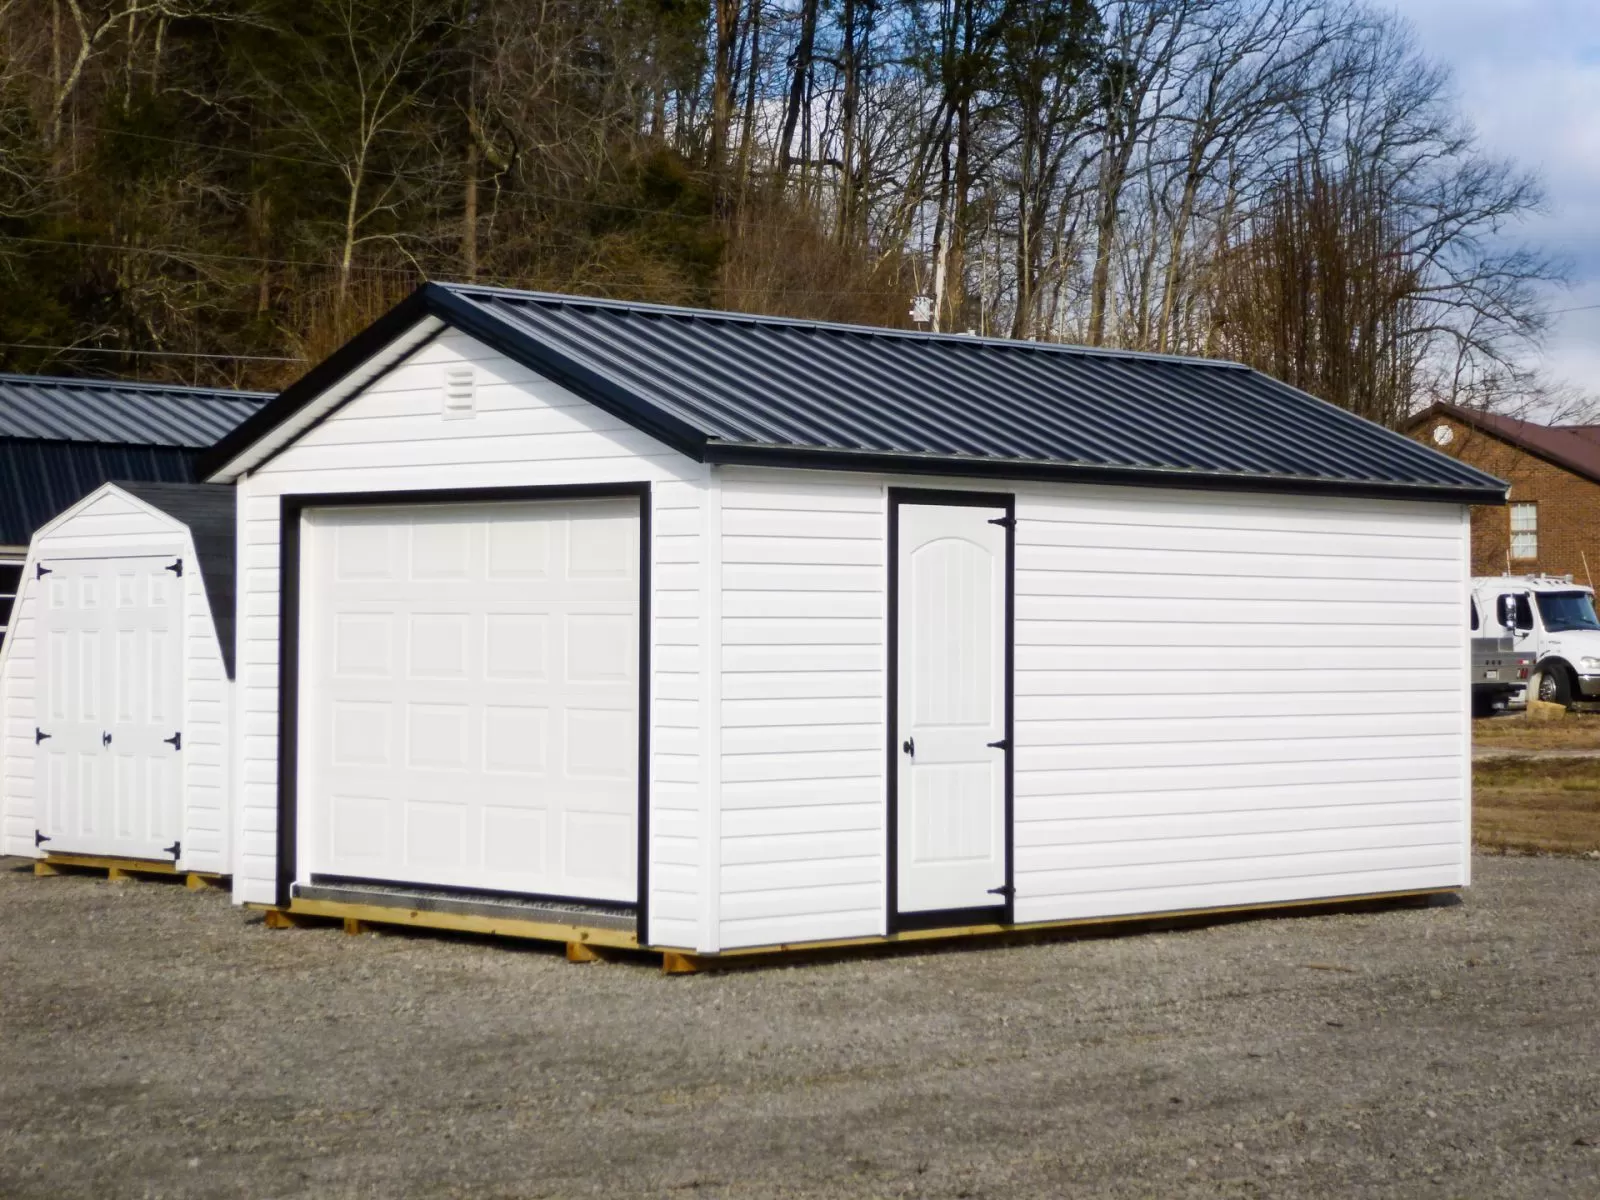 A garage shed in Kentucky with vinyl siding and a black metal roof